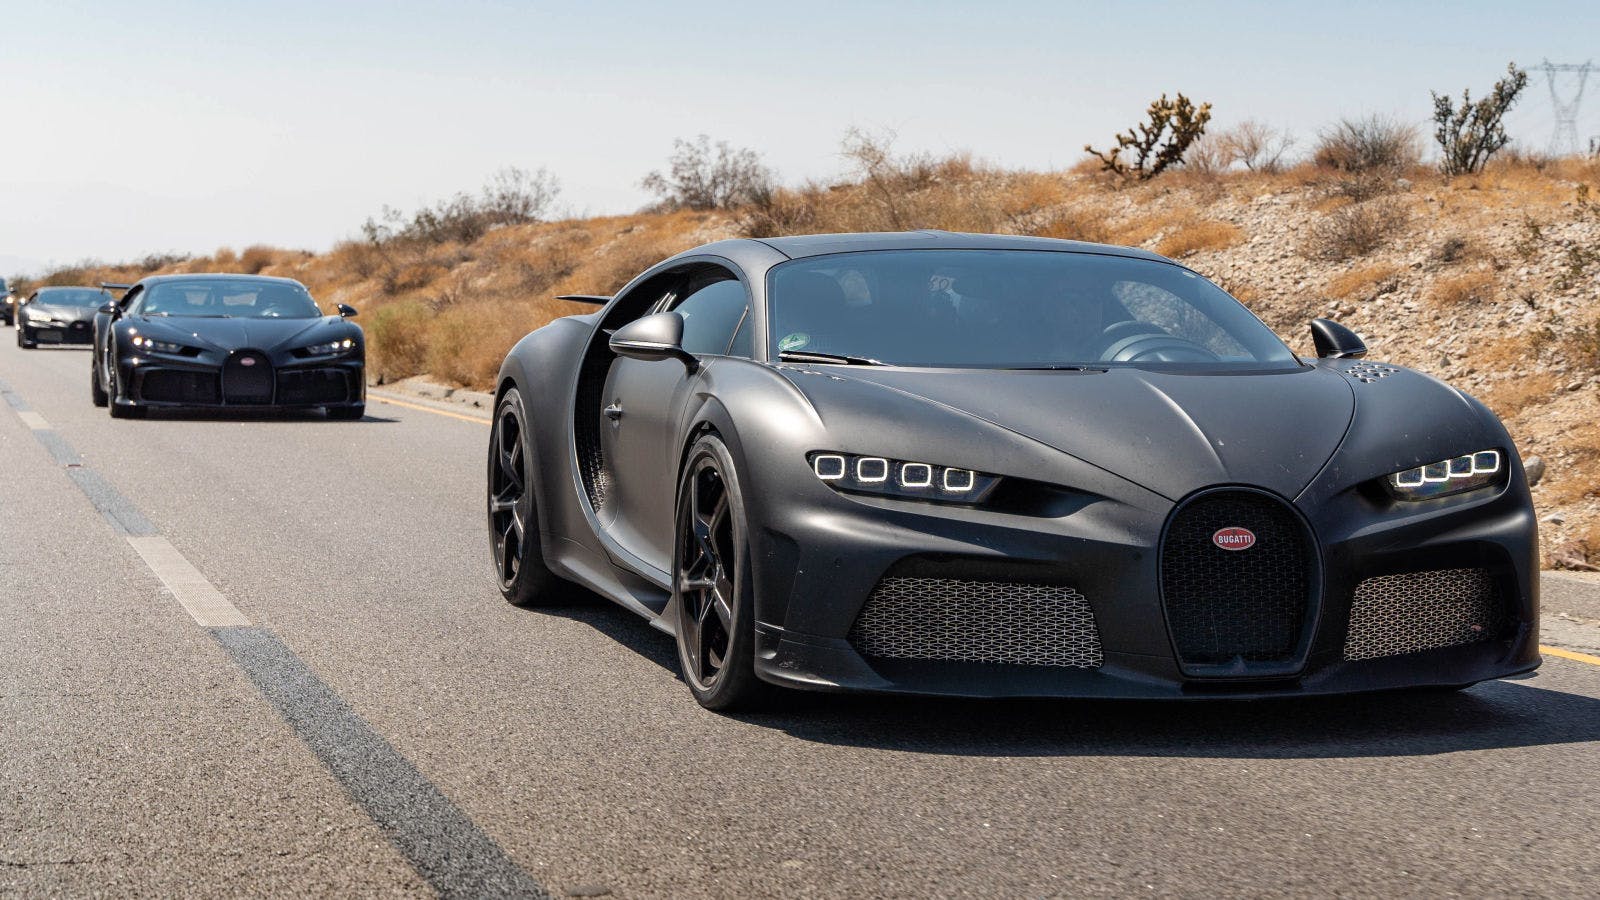 Hot weather testing: All Bugatti models have to function perfectly no matter how high the temperature.